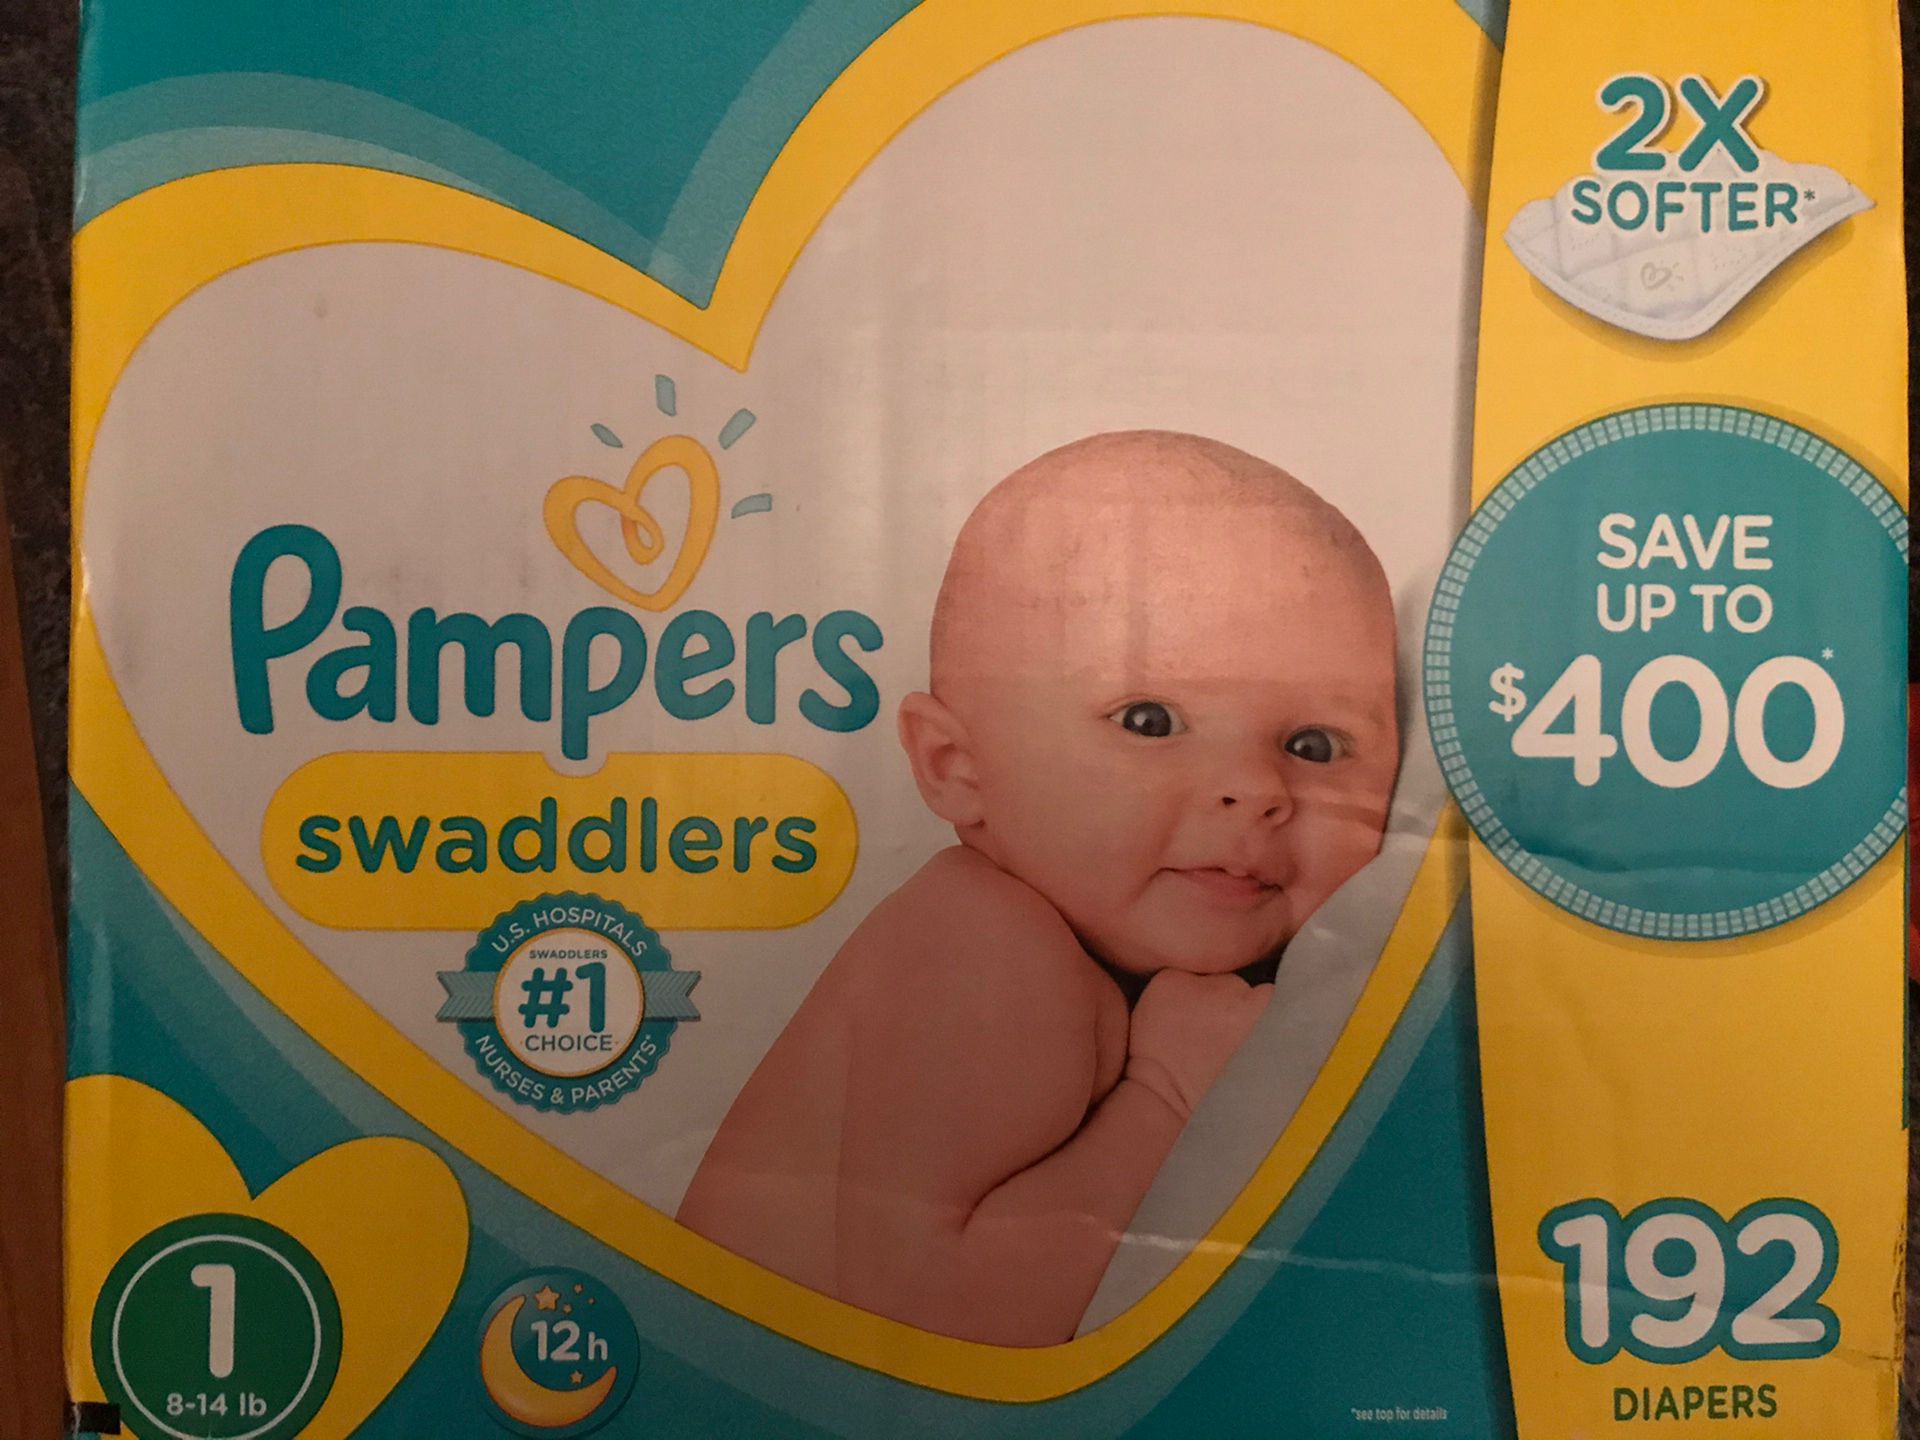 Pampers Swaddlers Size 1 Diapers